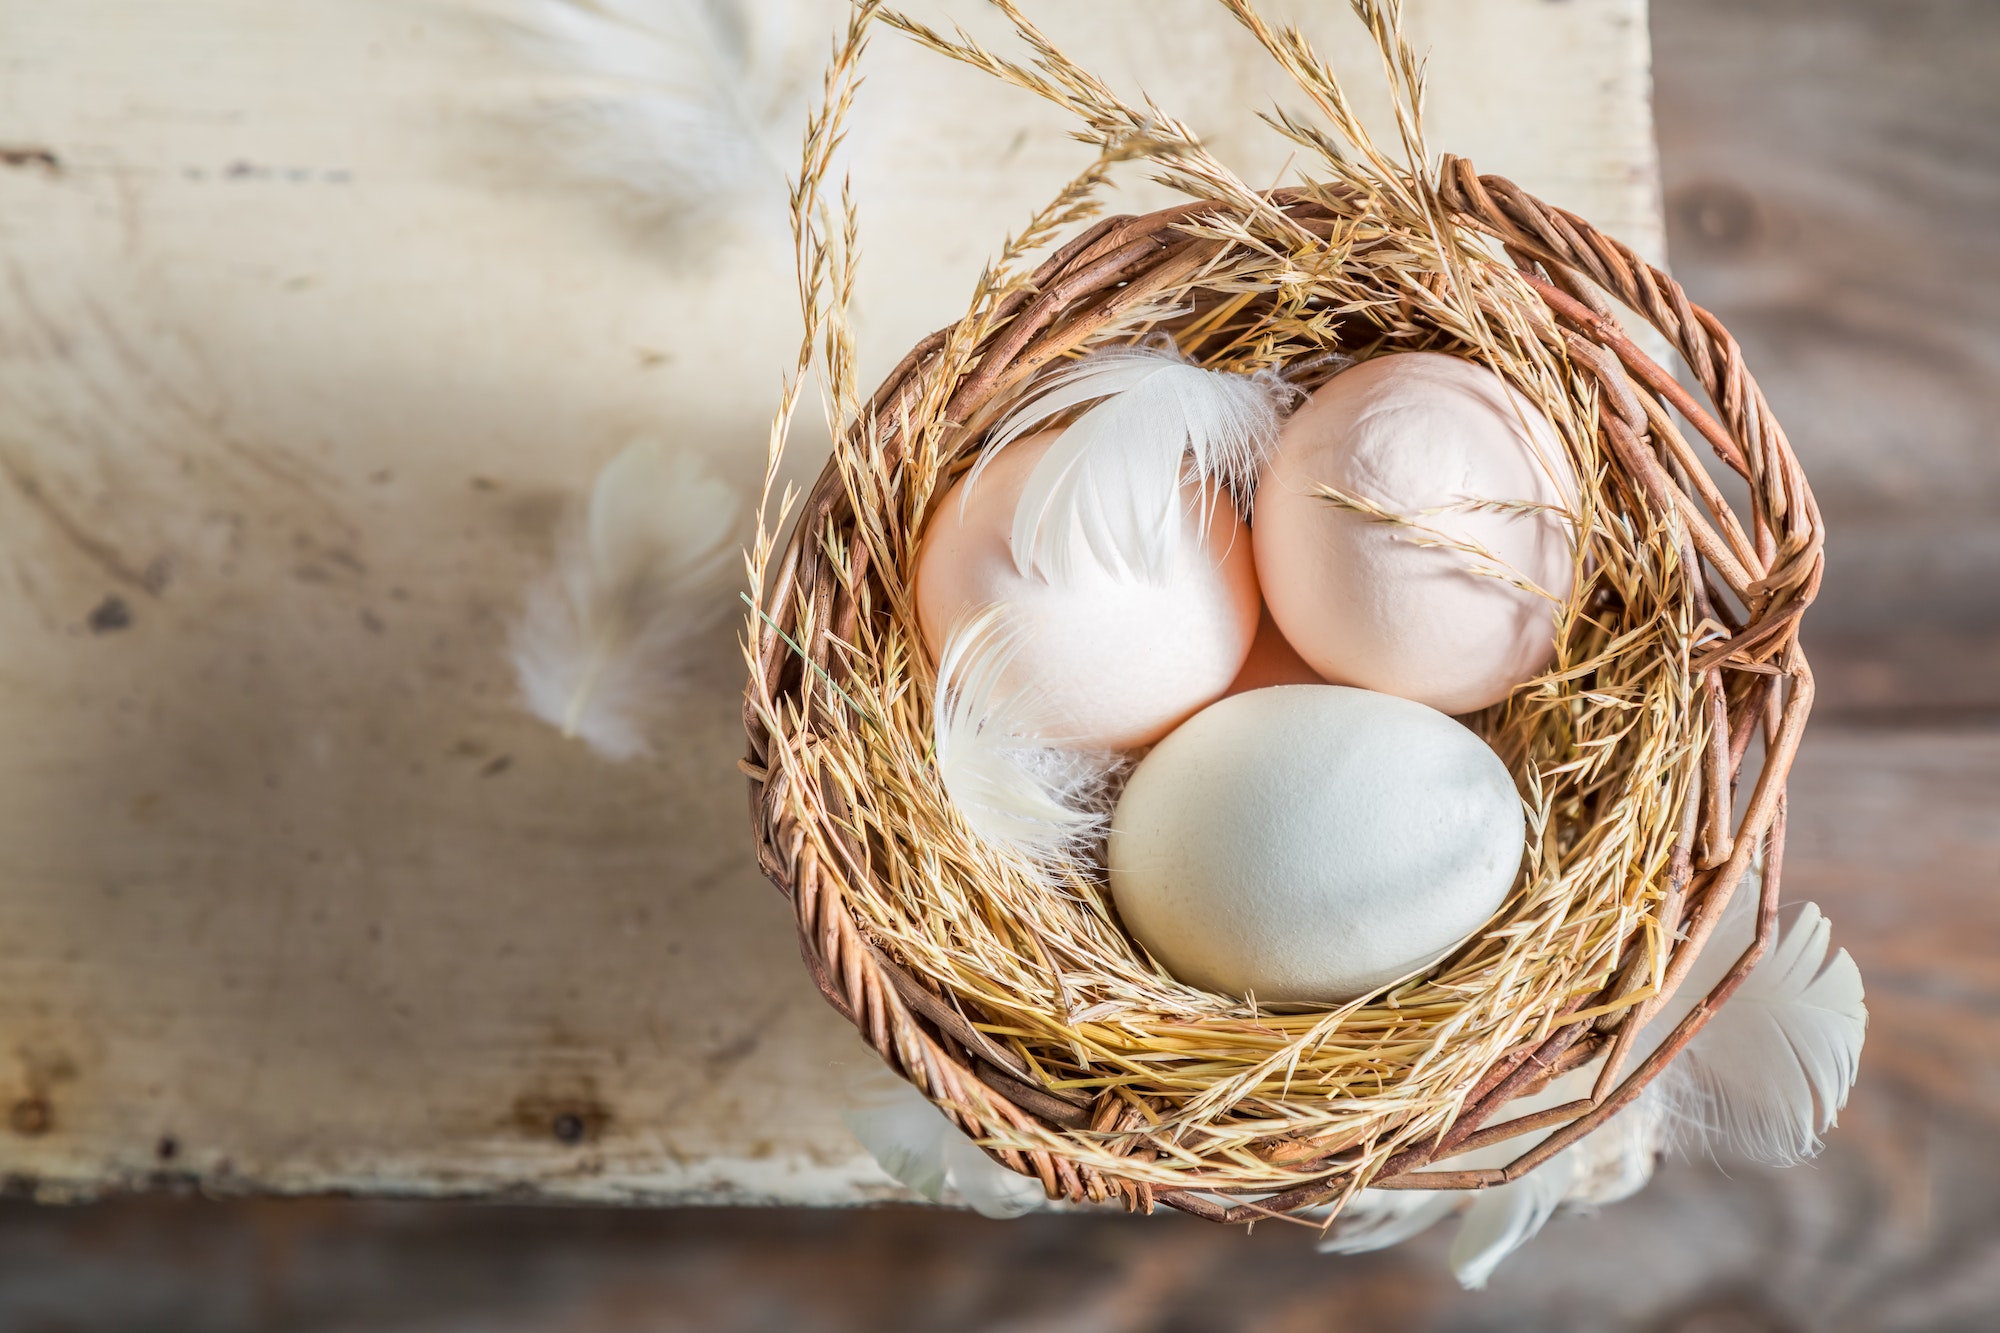 Healthy and ecological eggs in the basket